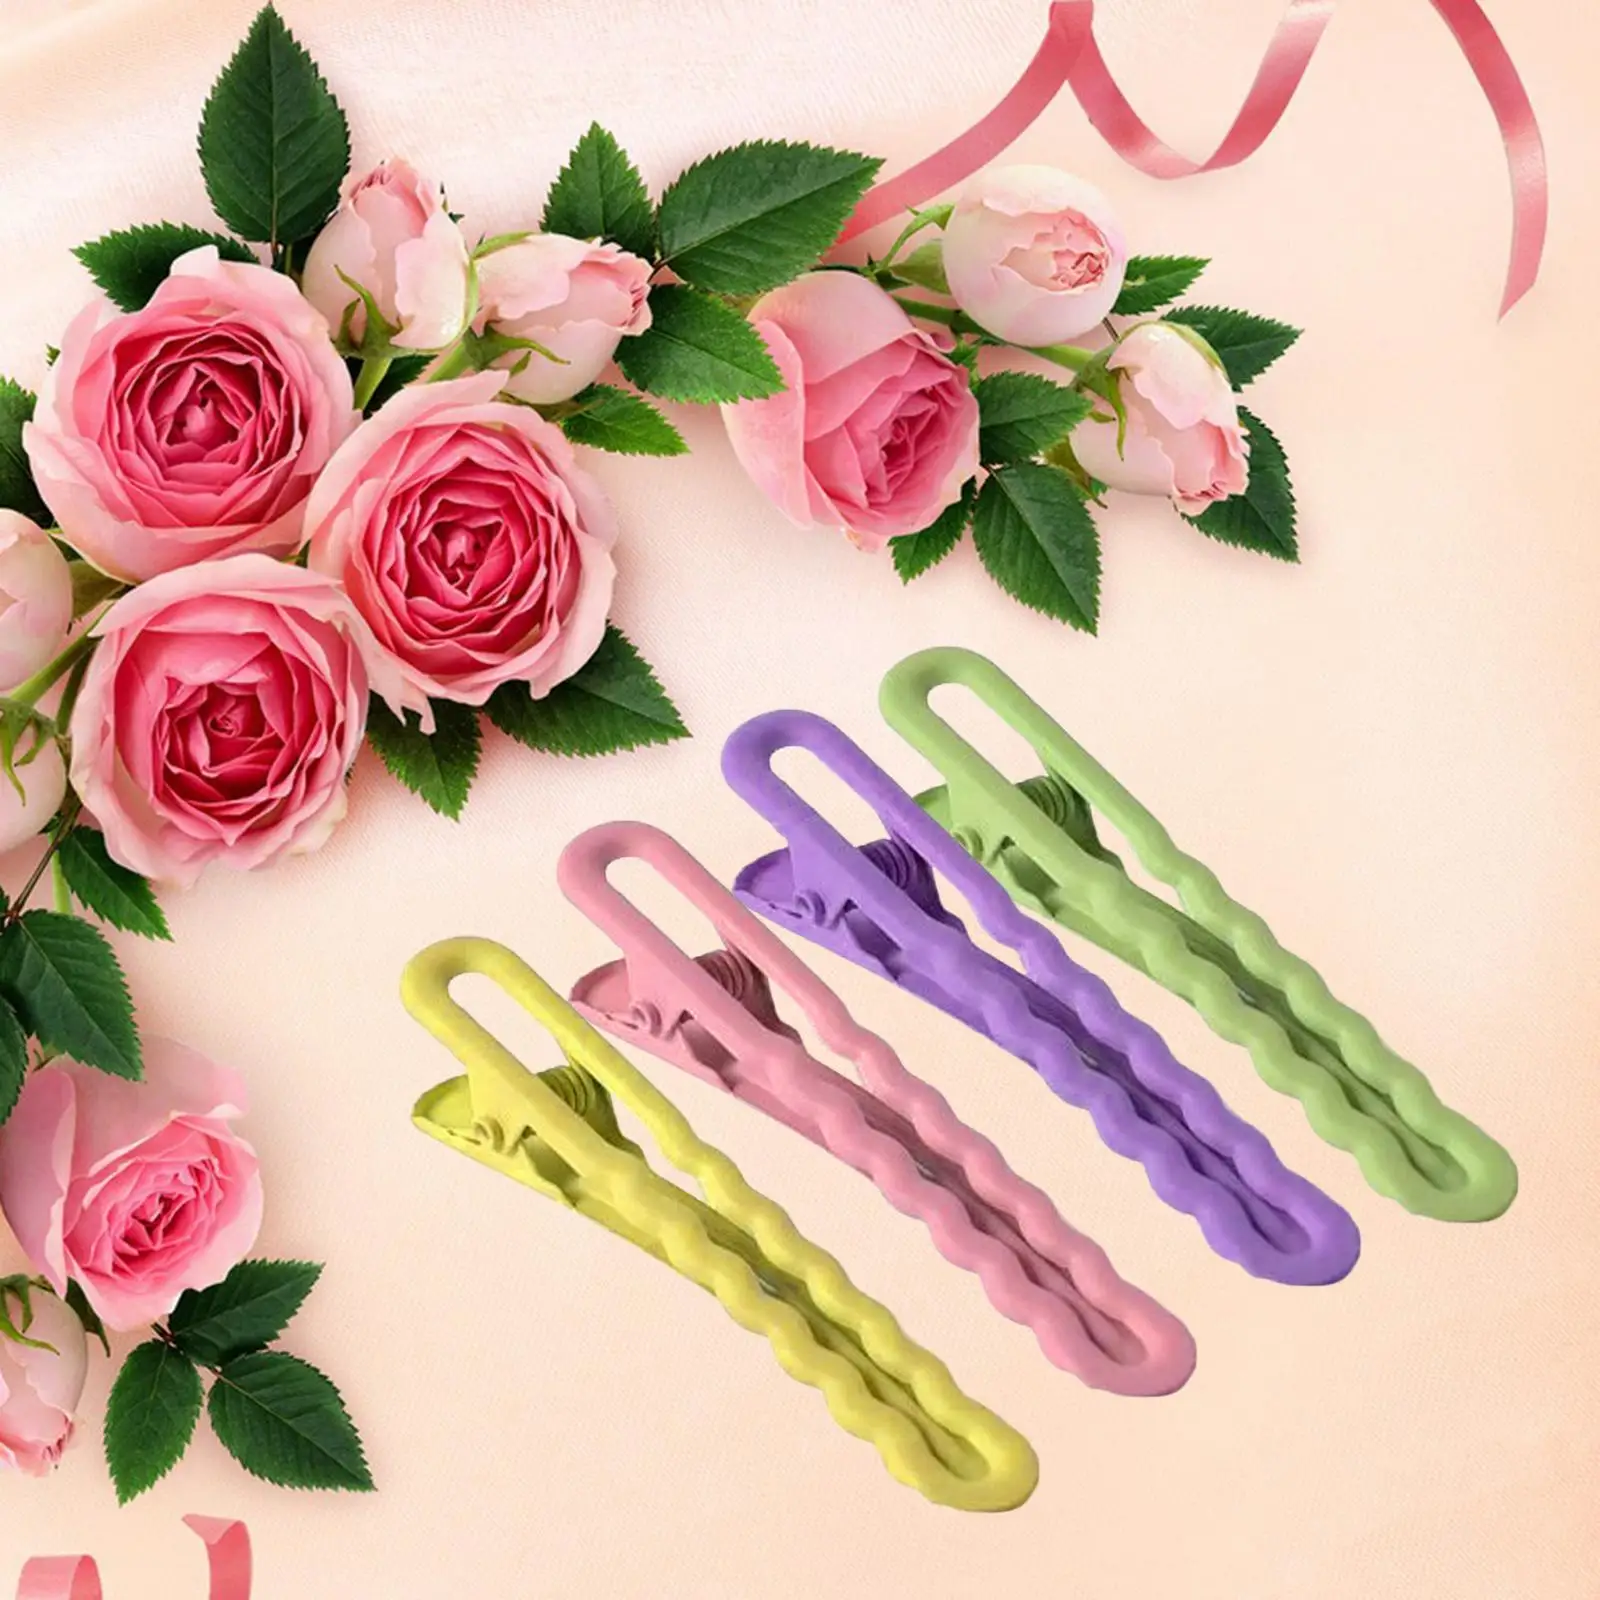 4Pcs Snap Hair Pins Metal Barrettes Cute Candy Color Tool Cream Hair Clips for Women Girls Party Wedding Gift